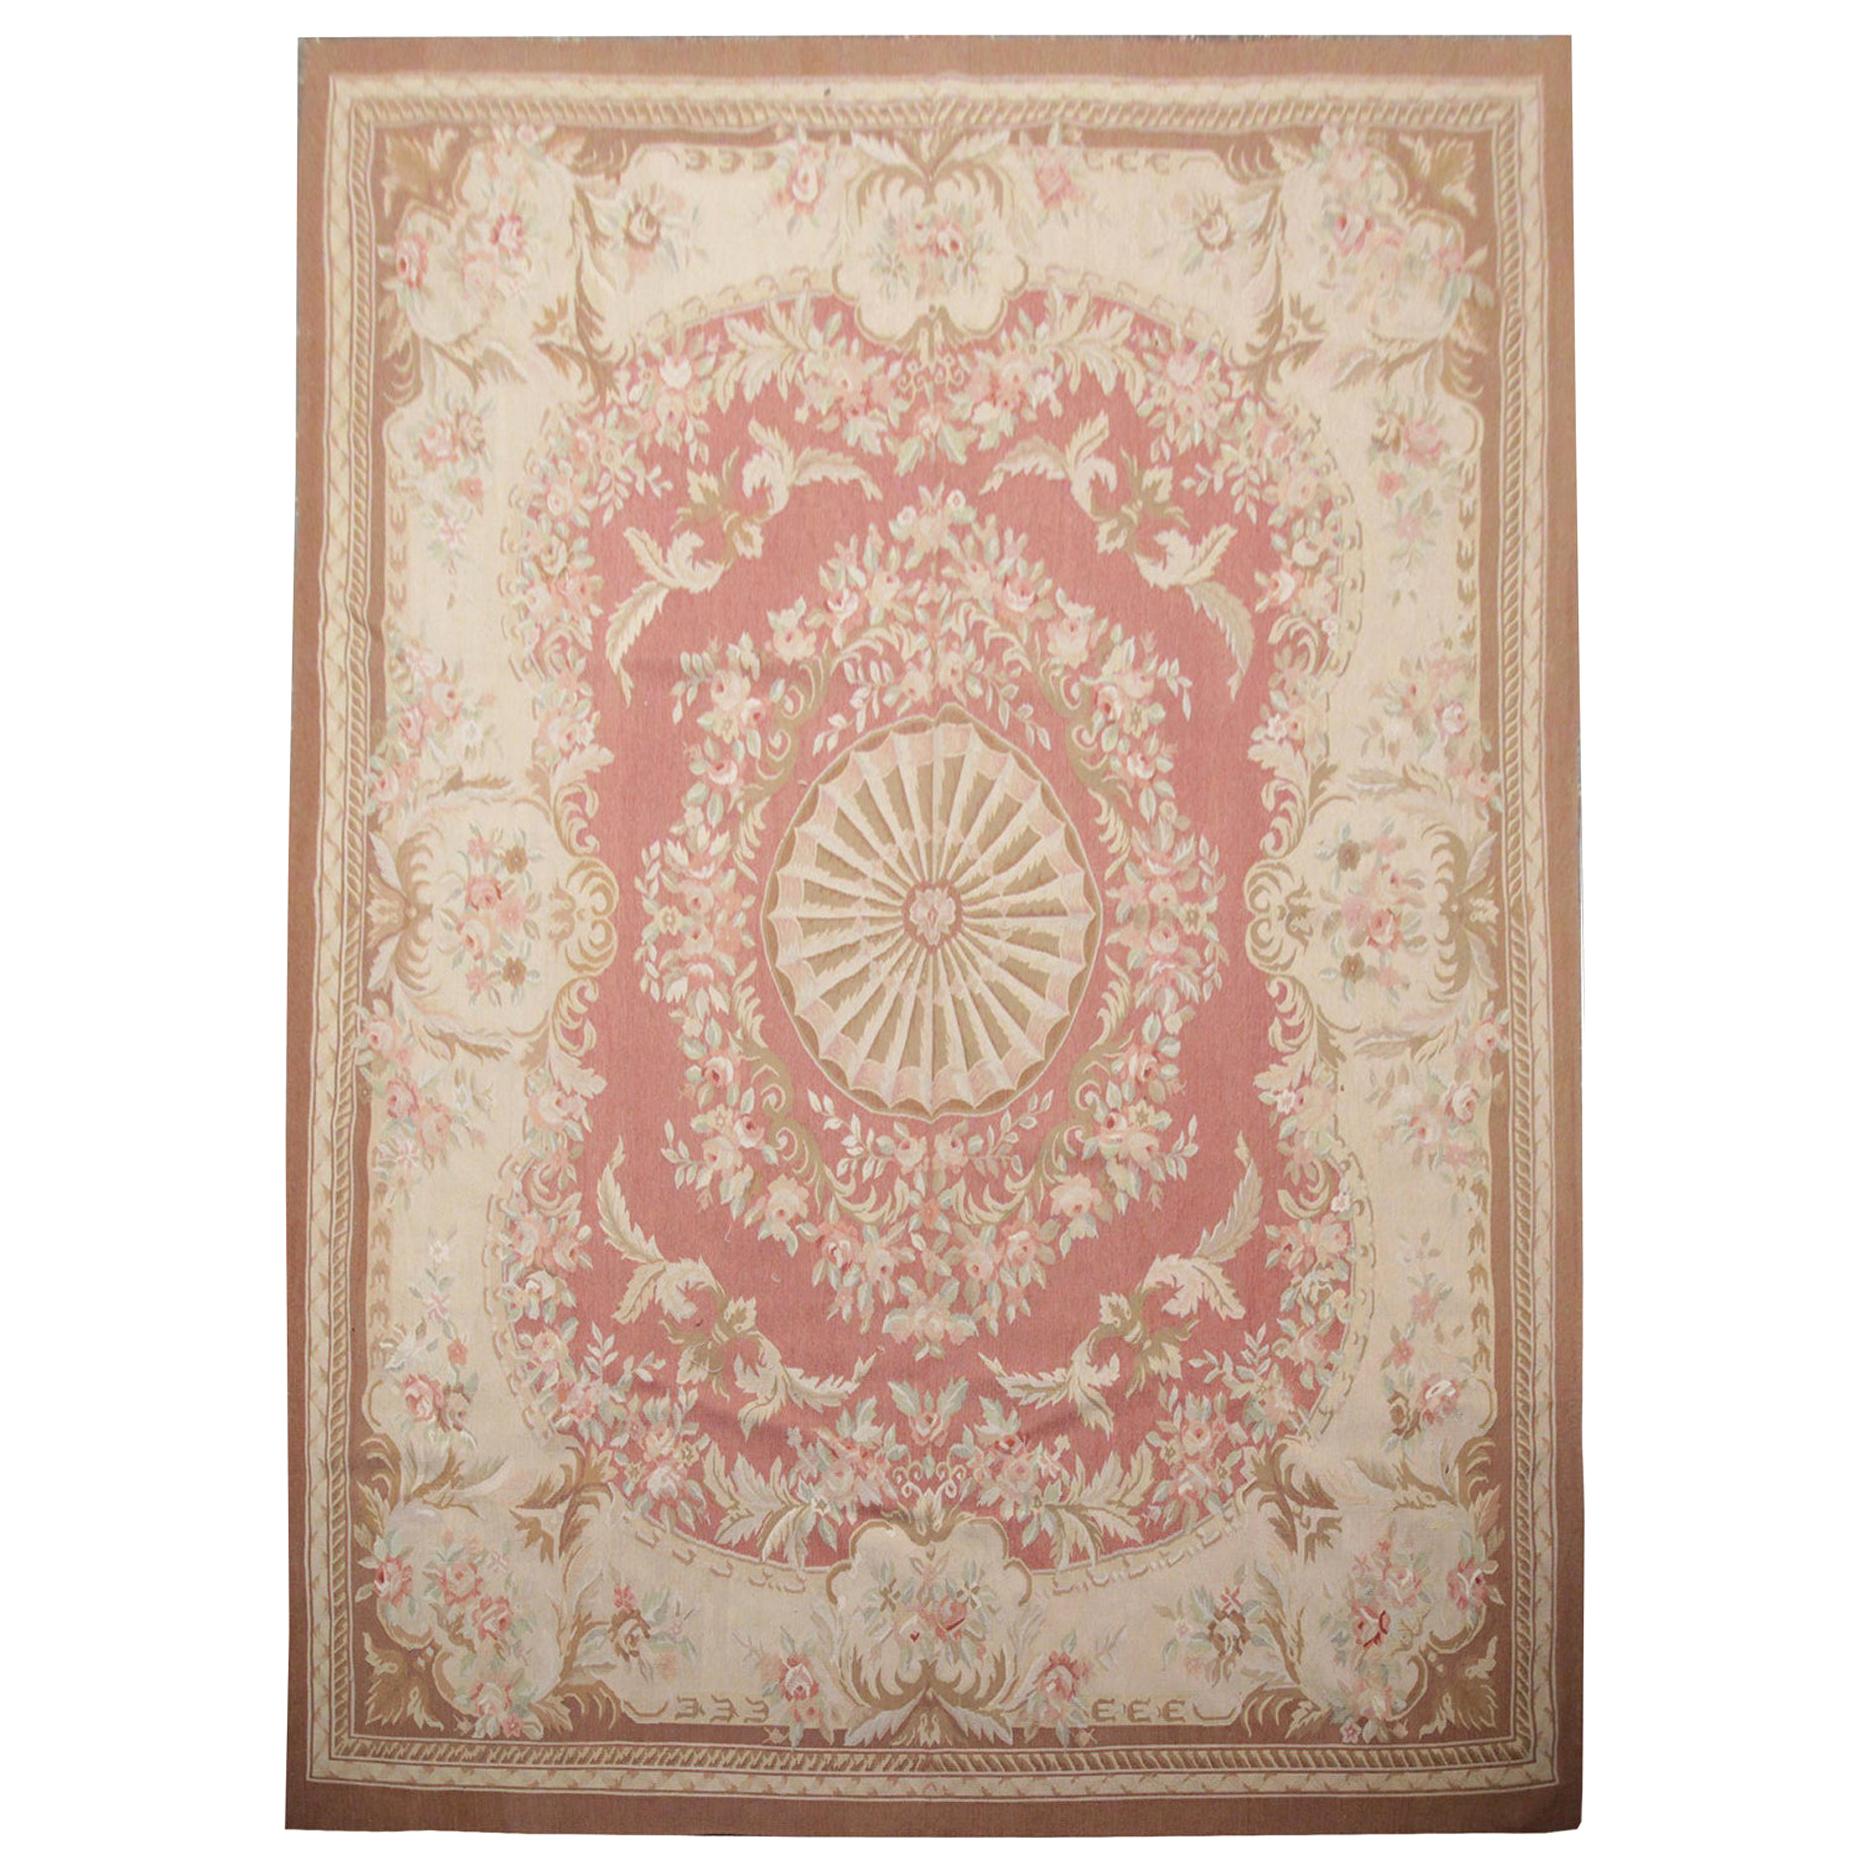 Handmade Carpet Vintage Aubusson Style Rug 1980 French, Pink and Beige Wool Rugs